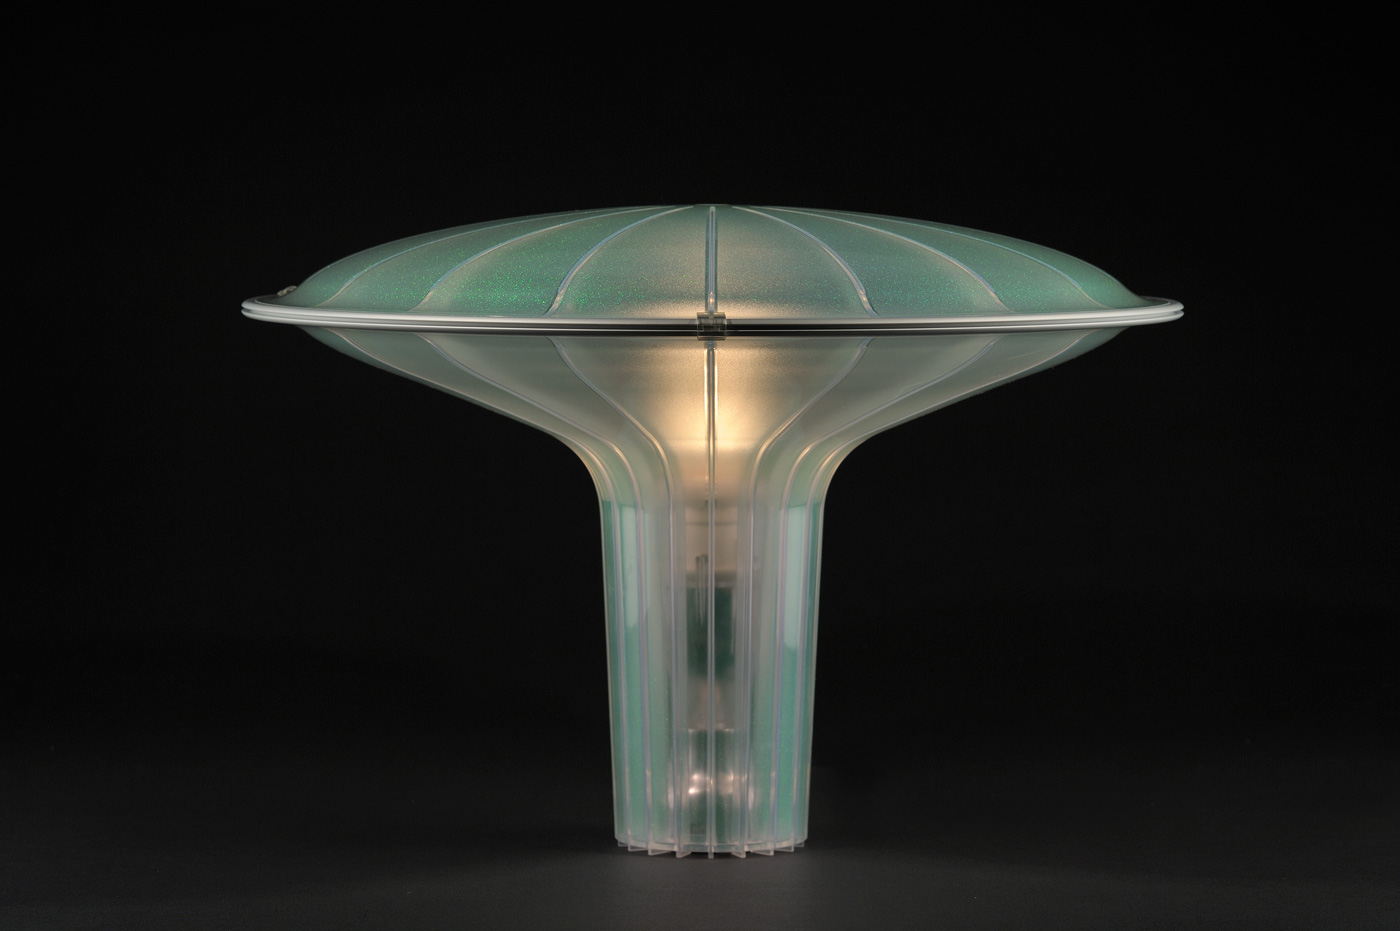 Translucent green plastic table lamp with conical base rising up and flaring outward with a domed top.